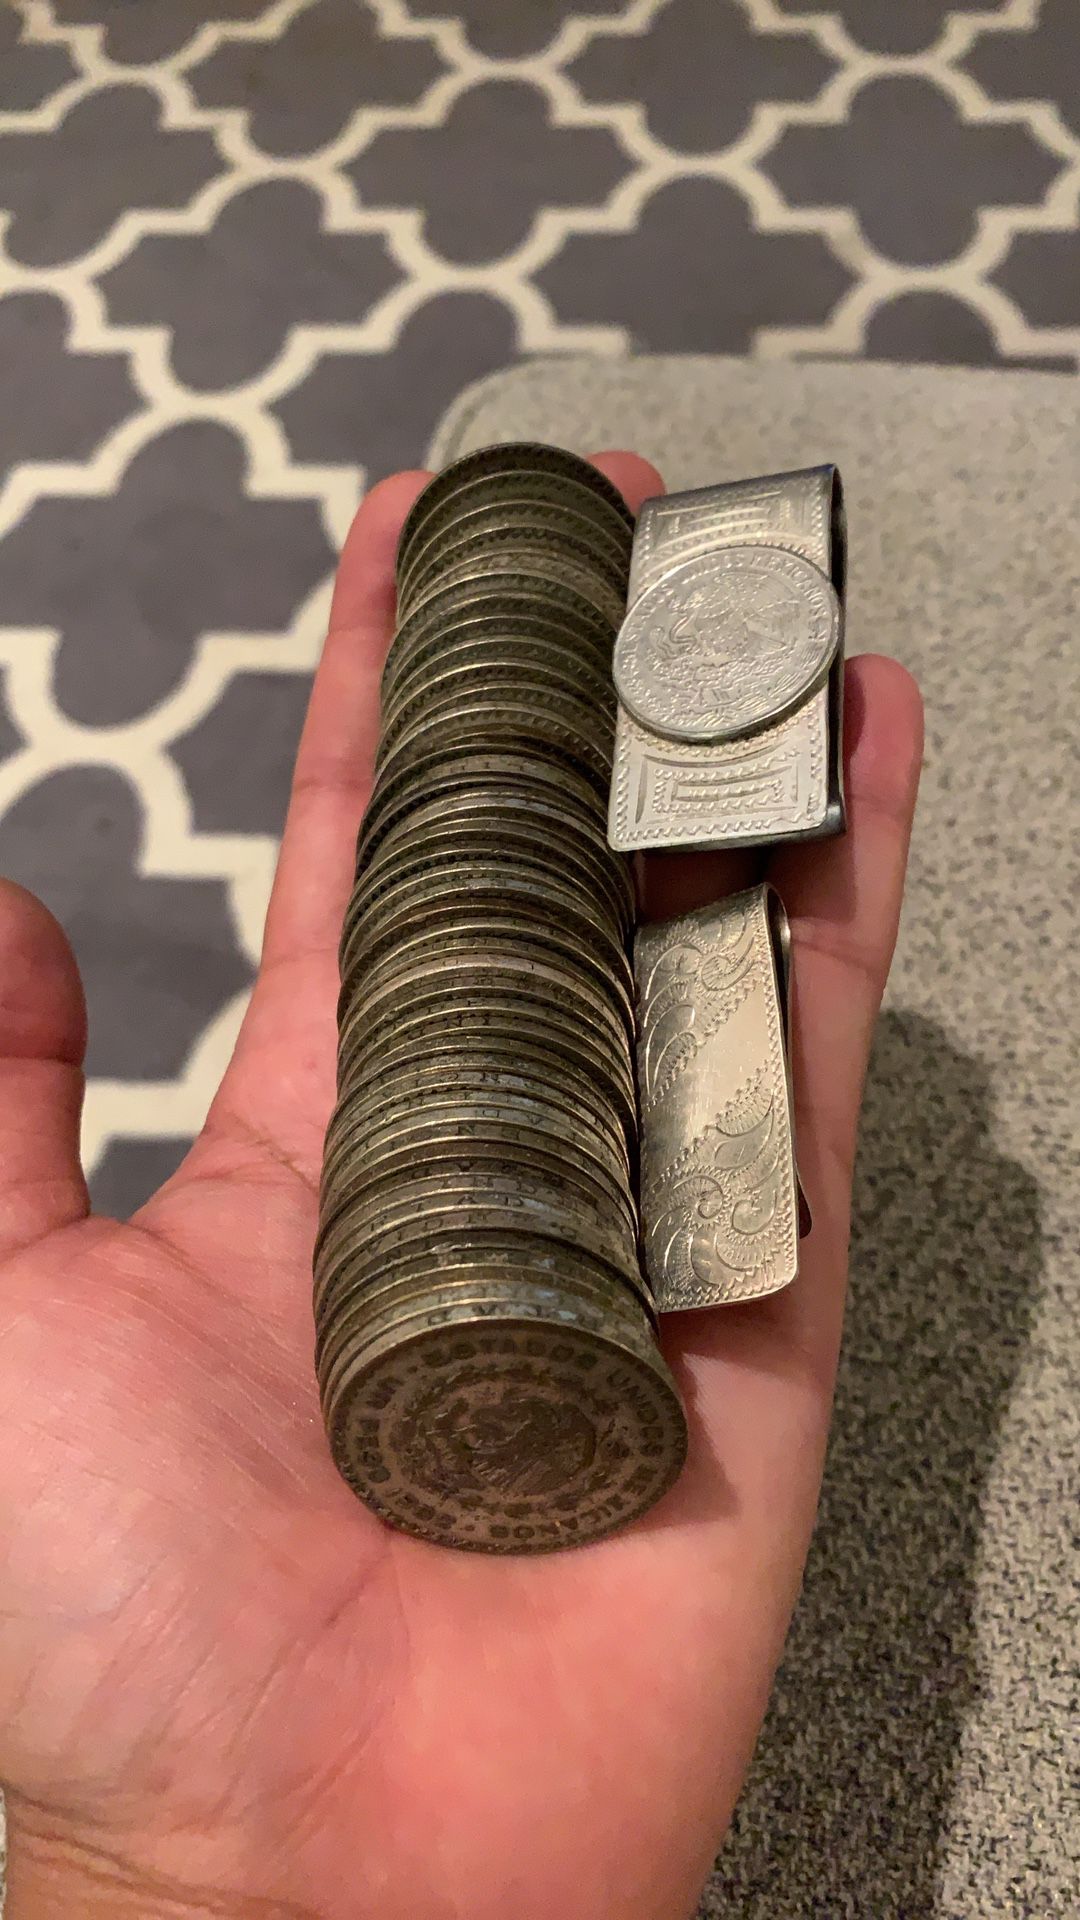 Mexican silver coins and money clips